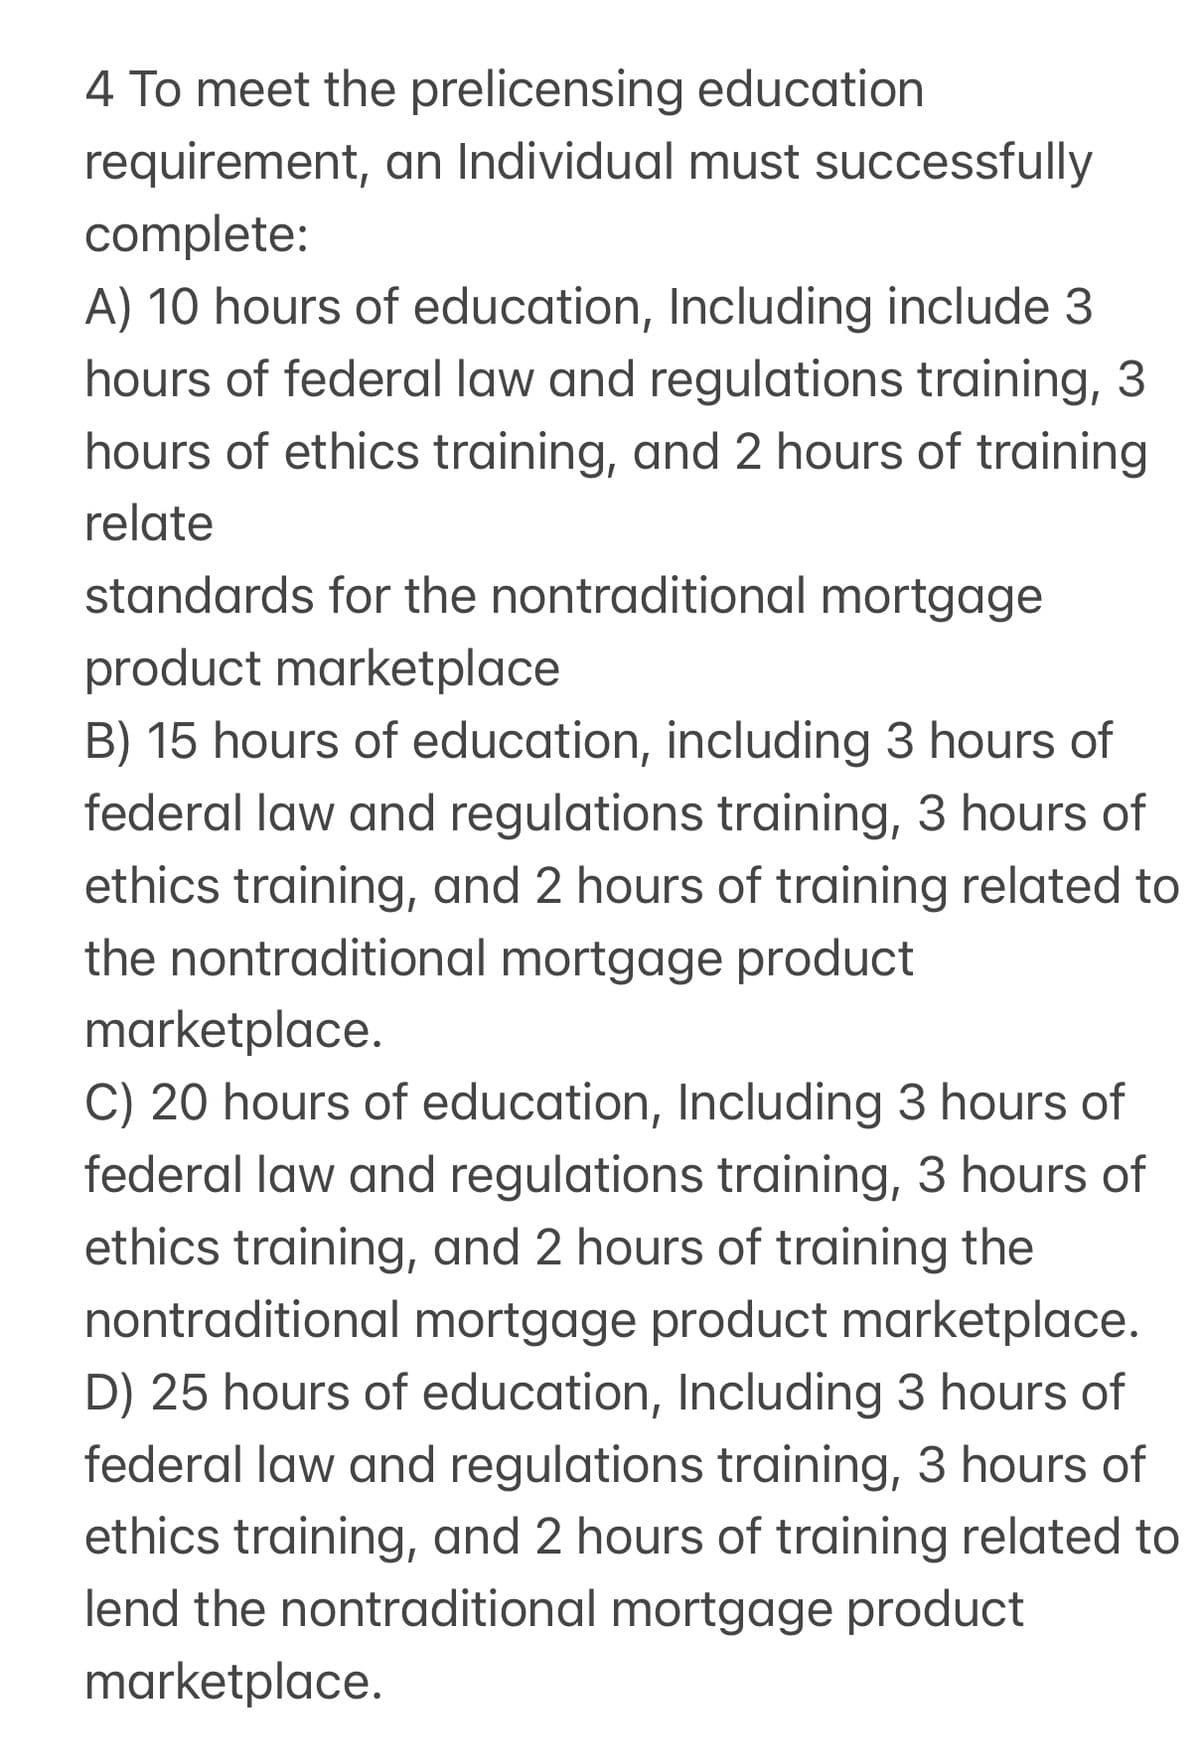 4 To meet the prelicensing education
requirement, an Individual must successfully
complete:
A) 10 hours of education, Including include 3
hours of federal law and regulations training, 3
hours of ethics training, and 2 hours of training
relate
standards for the nontraditional mortgage
product marketplace
B) 15 hours of education, including 3 hours of
federal law and regulations training, 3 hours of
ethics training, and 2 hours of training related to
the nontraditional mortgage product
marketplace.
C) 20 hours of education, Including 3 hours of
federal law and regulations training, 3 hours of
ethics training, and 2 hours of training the
nontraditional mortgage product marketplace.
D) 25 hours of education, Including 3 hours of
federal law and regulations training, 3 hours of
ethics training, and 2 hours of training related to
lend the nontraditional mortgage product
marketplace.